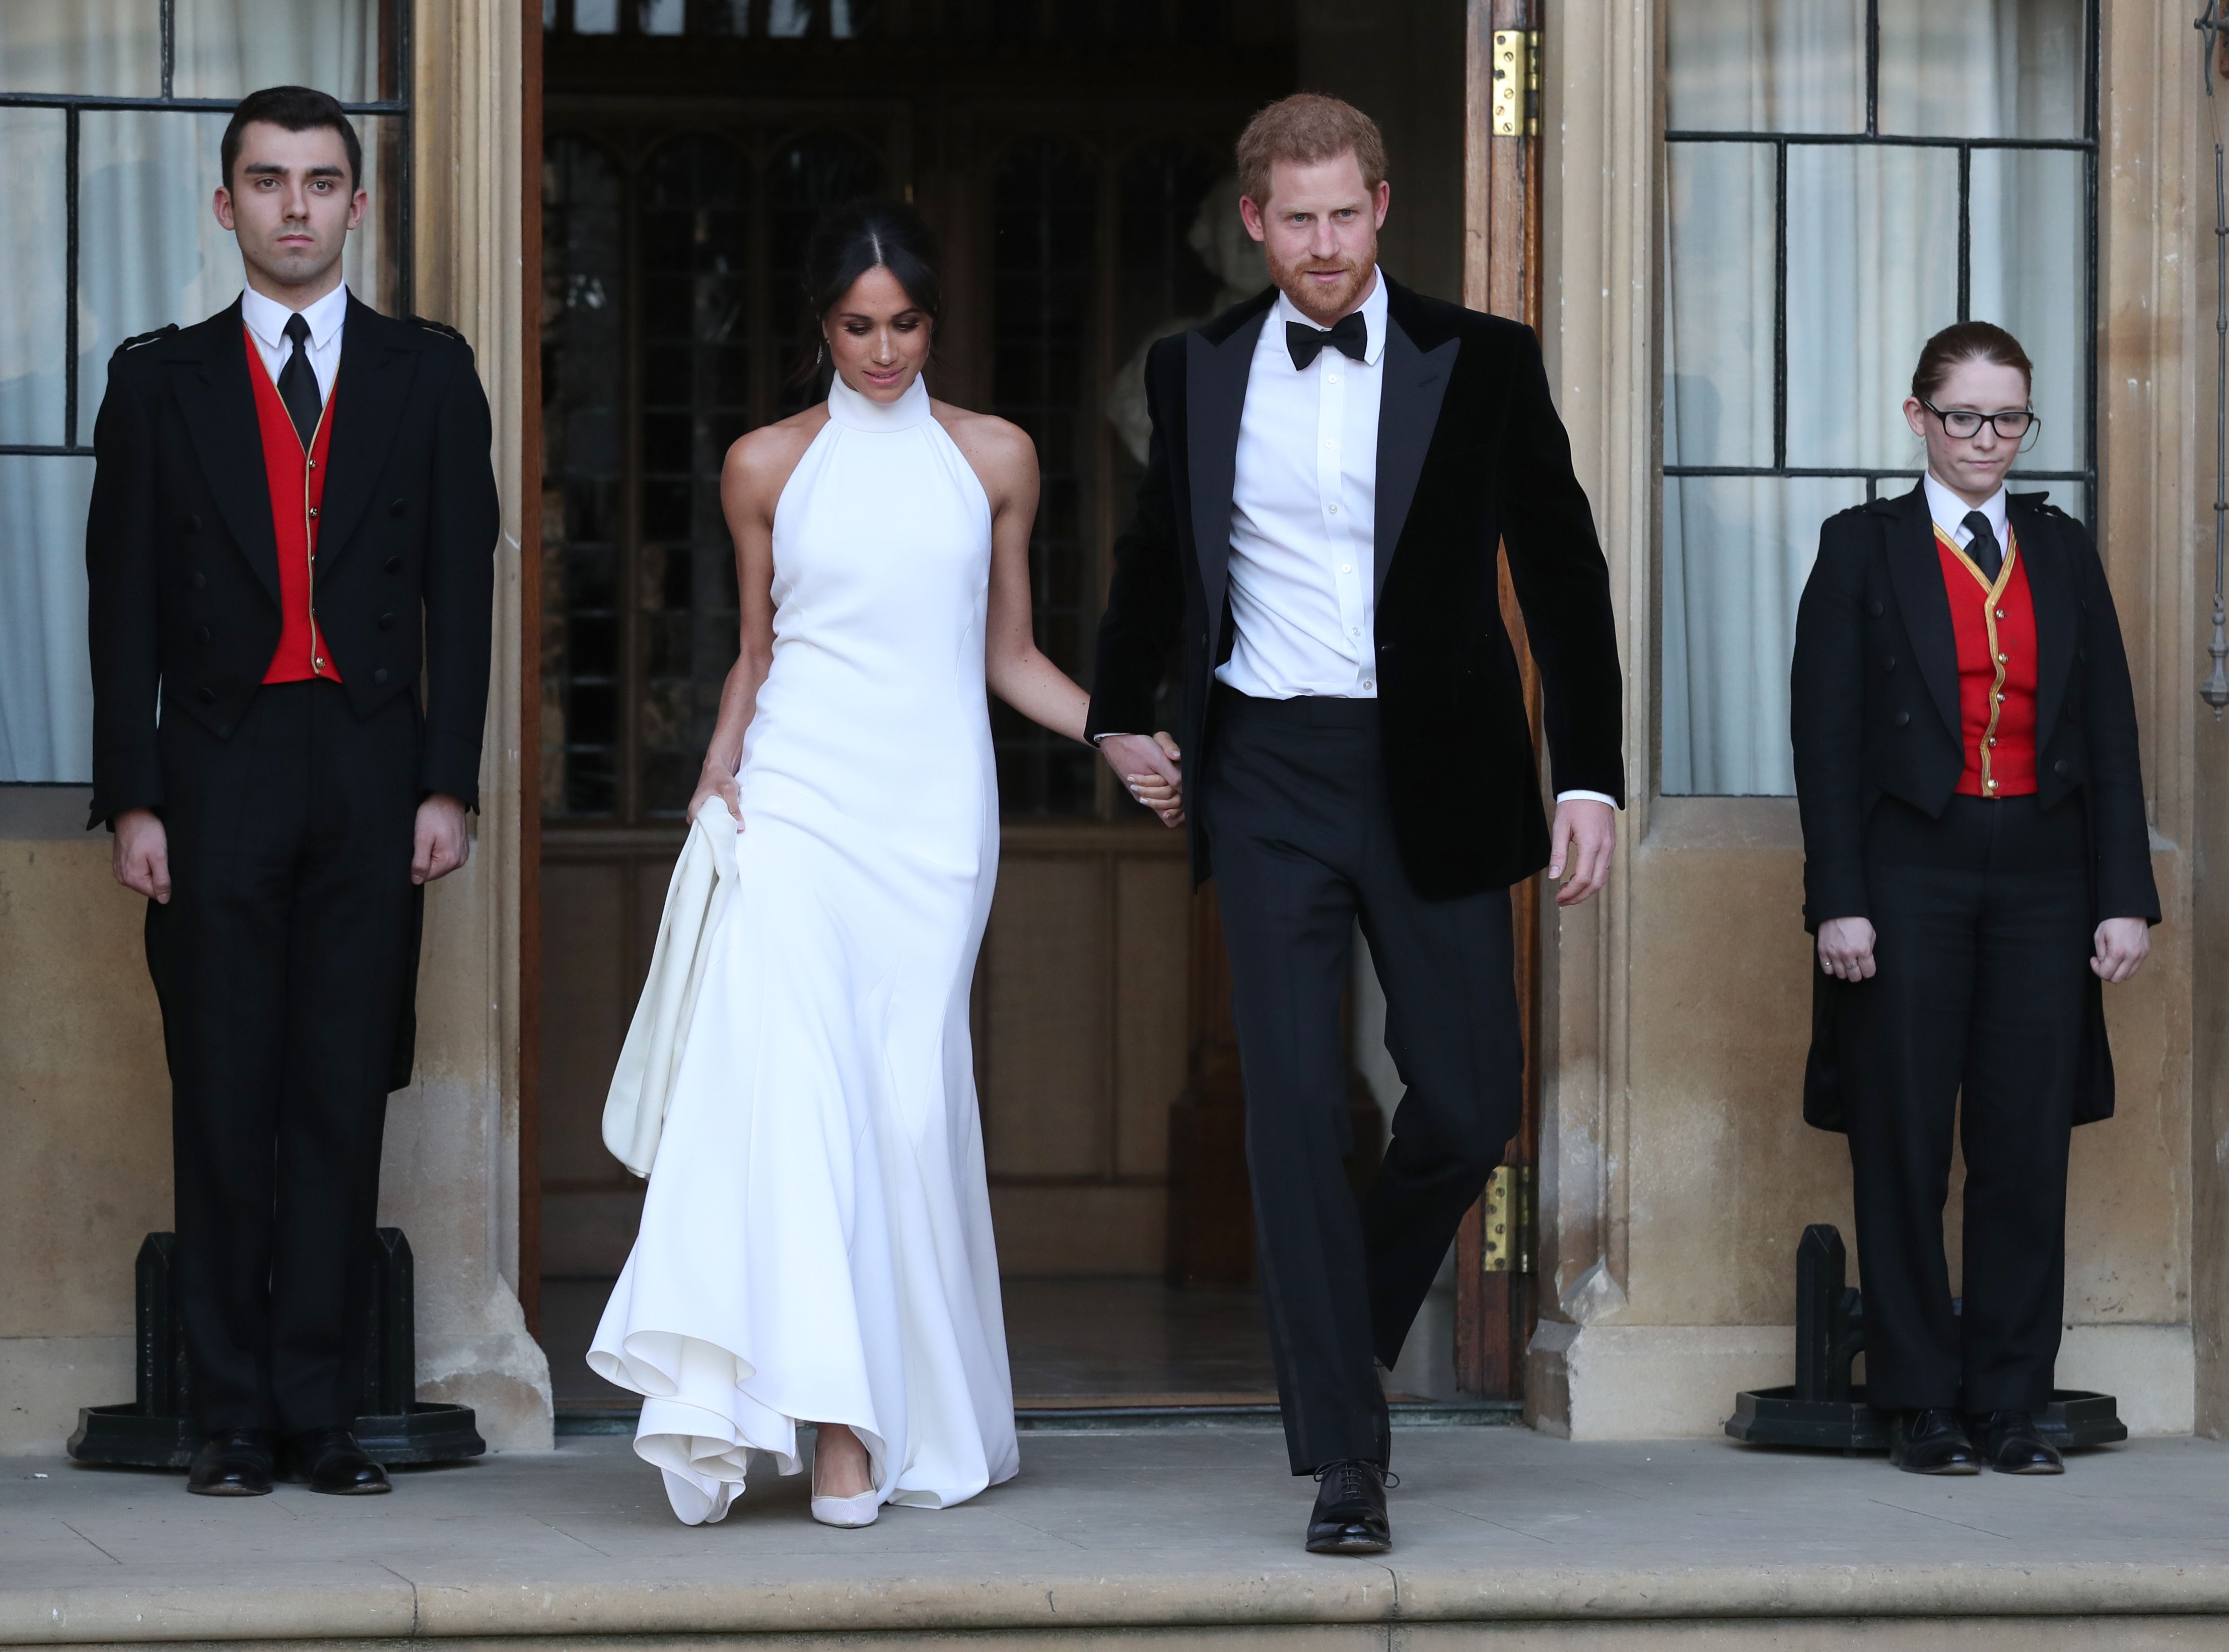 Newly married Meghan Markle, Duchess of Sussex, wears a Stella McCartney wedding reception dress while leaving Windsor Castle in Windsor on May 19, 2018 after their wedding to attend an evening reception at Frogmore House. (STEVE PARSONS—AFP/Getty Images)